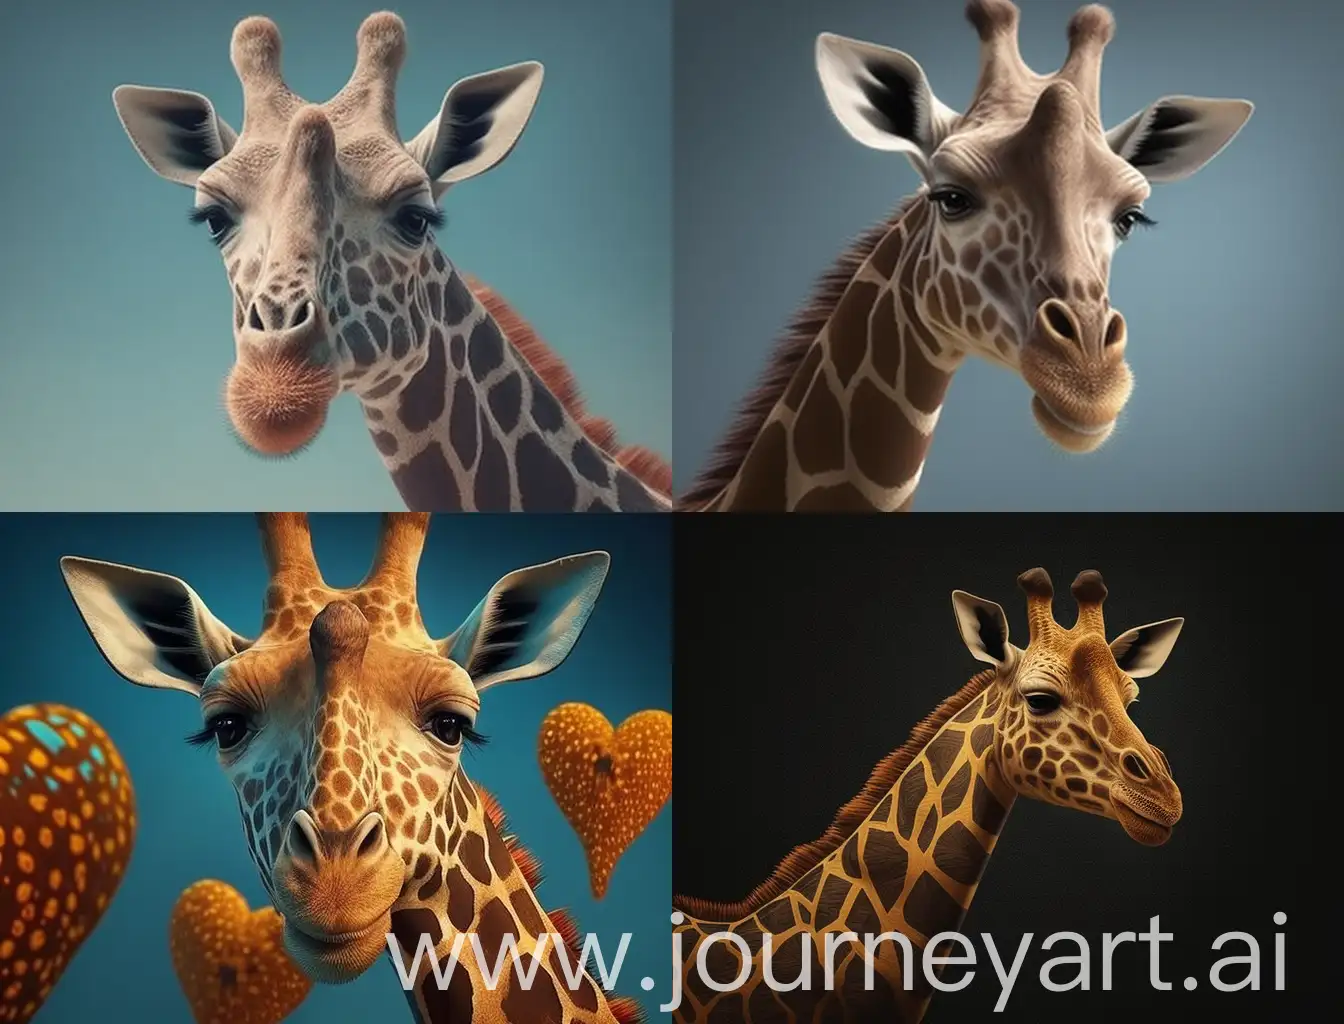 Giraffe-with-HeartShaped-Spot-Playful-Animation-in-43-Aspect-Ratio